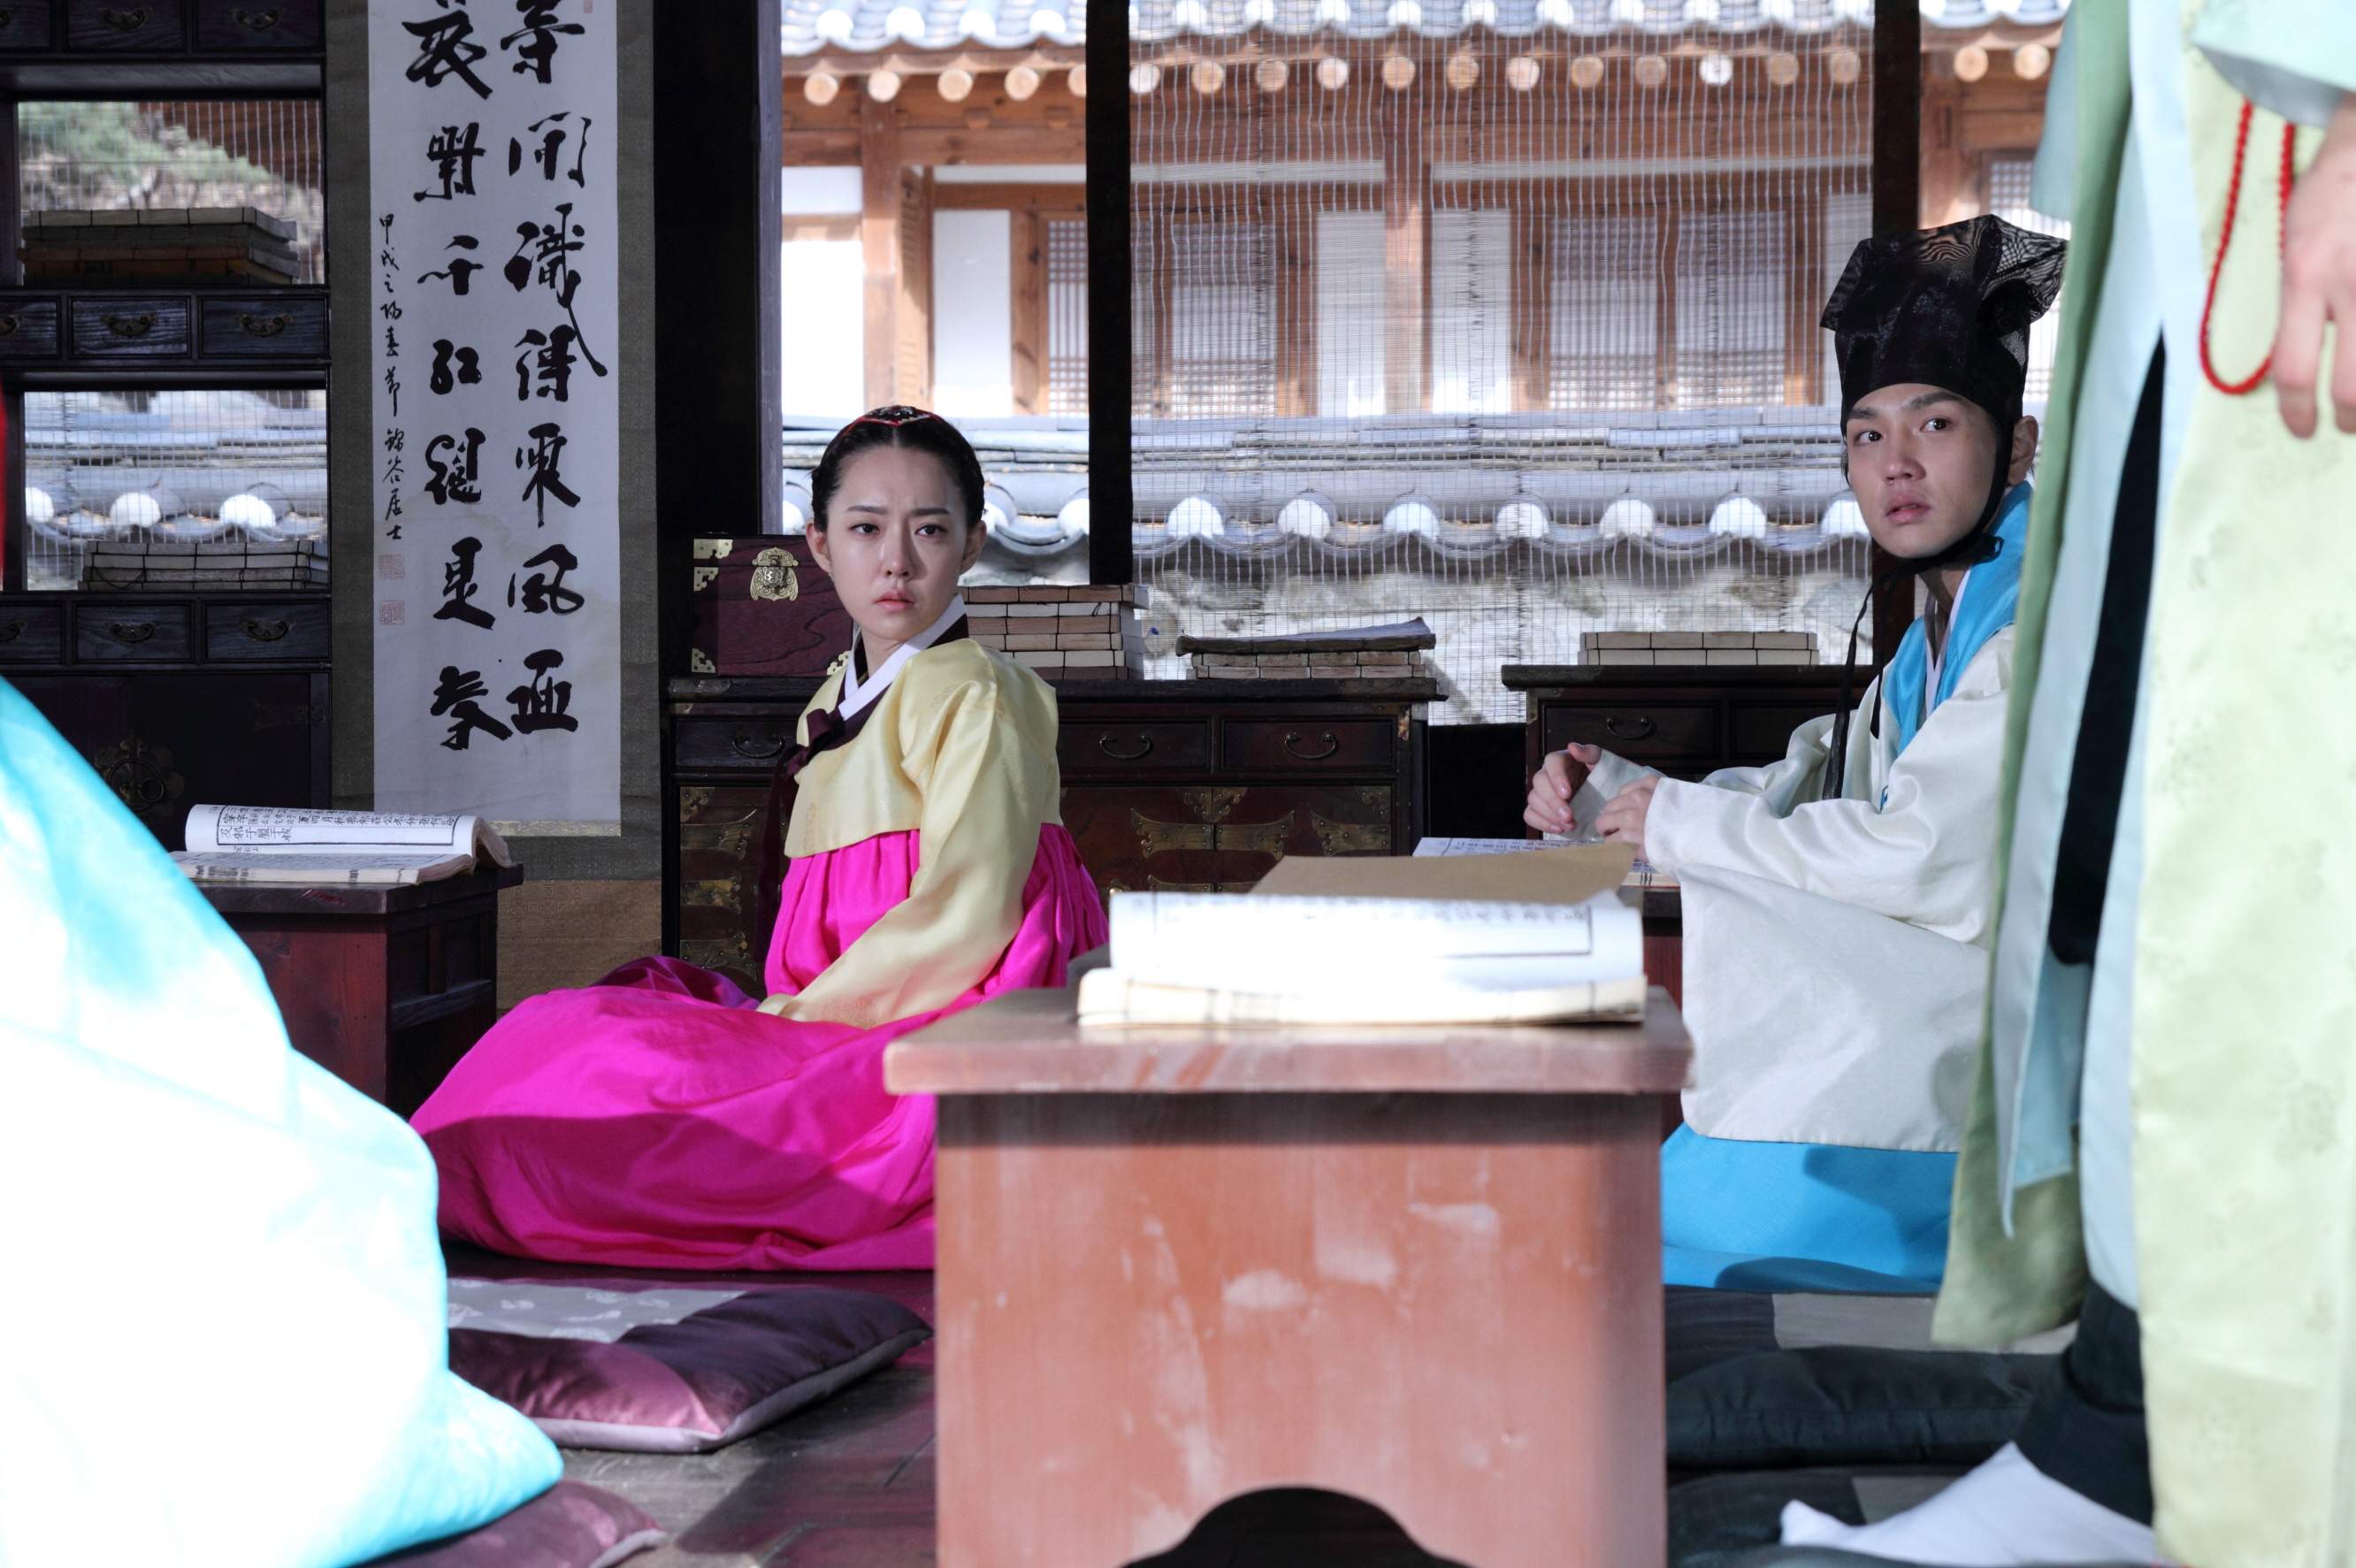 School Of Youth 2 The Unofficial History Of The Gisaeng Break In Picture Movie 2016 청춘학당2 